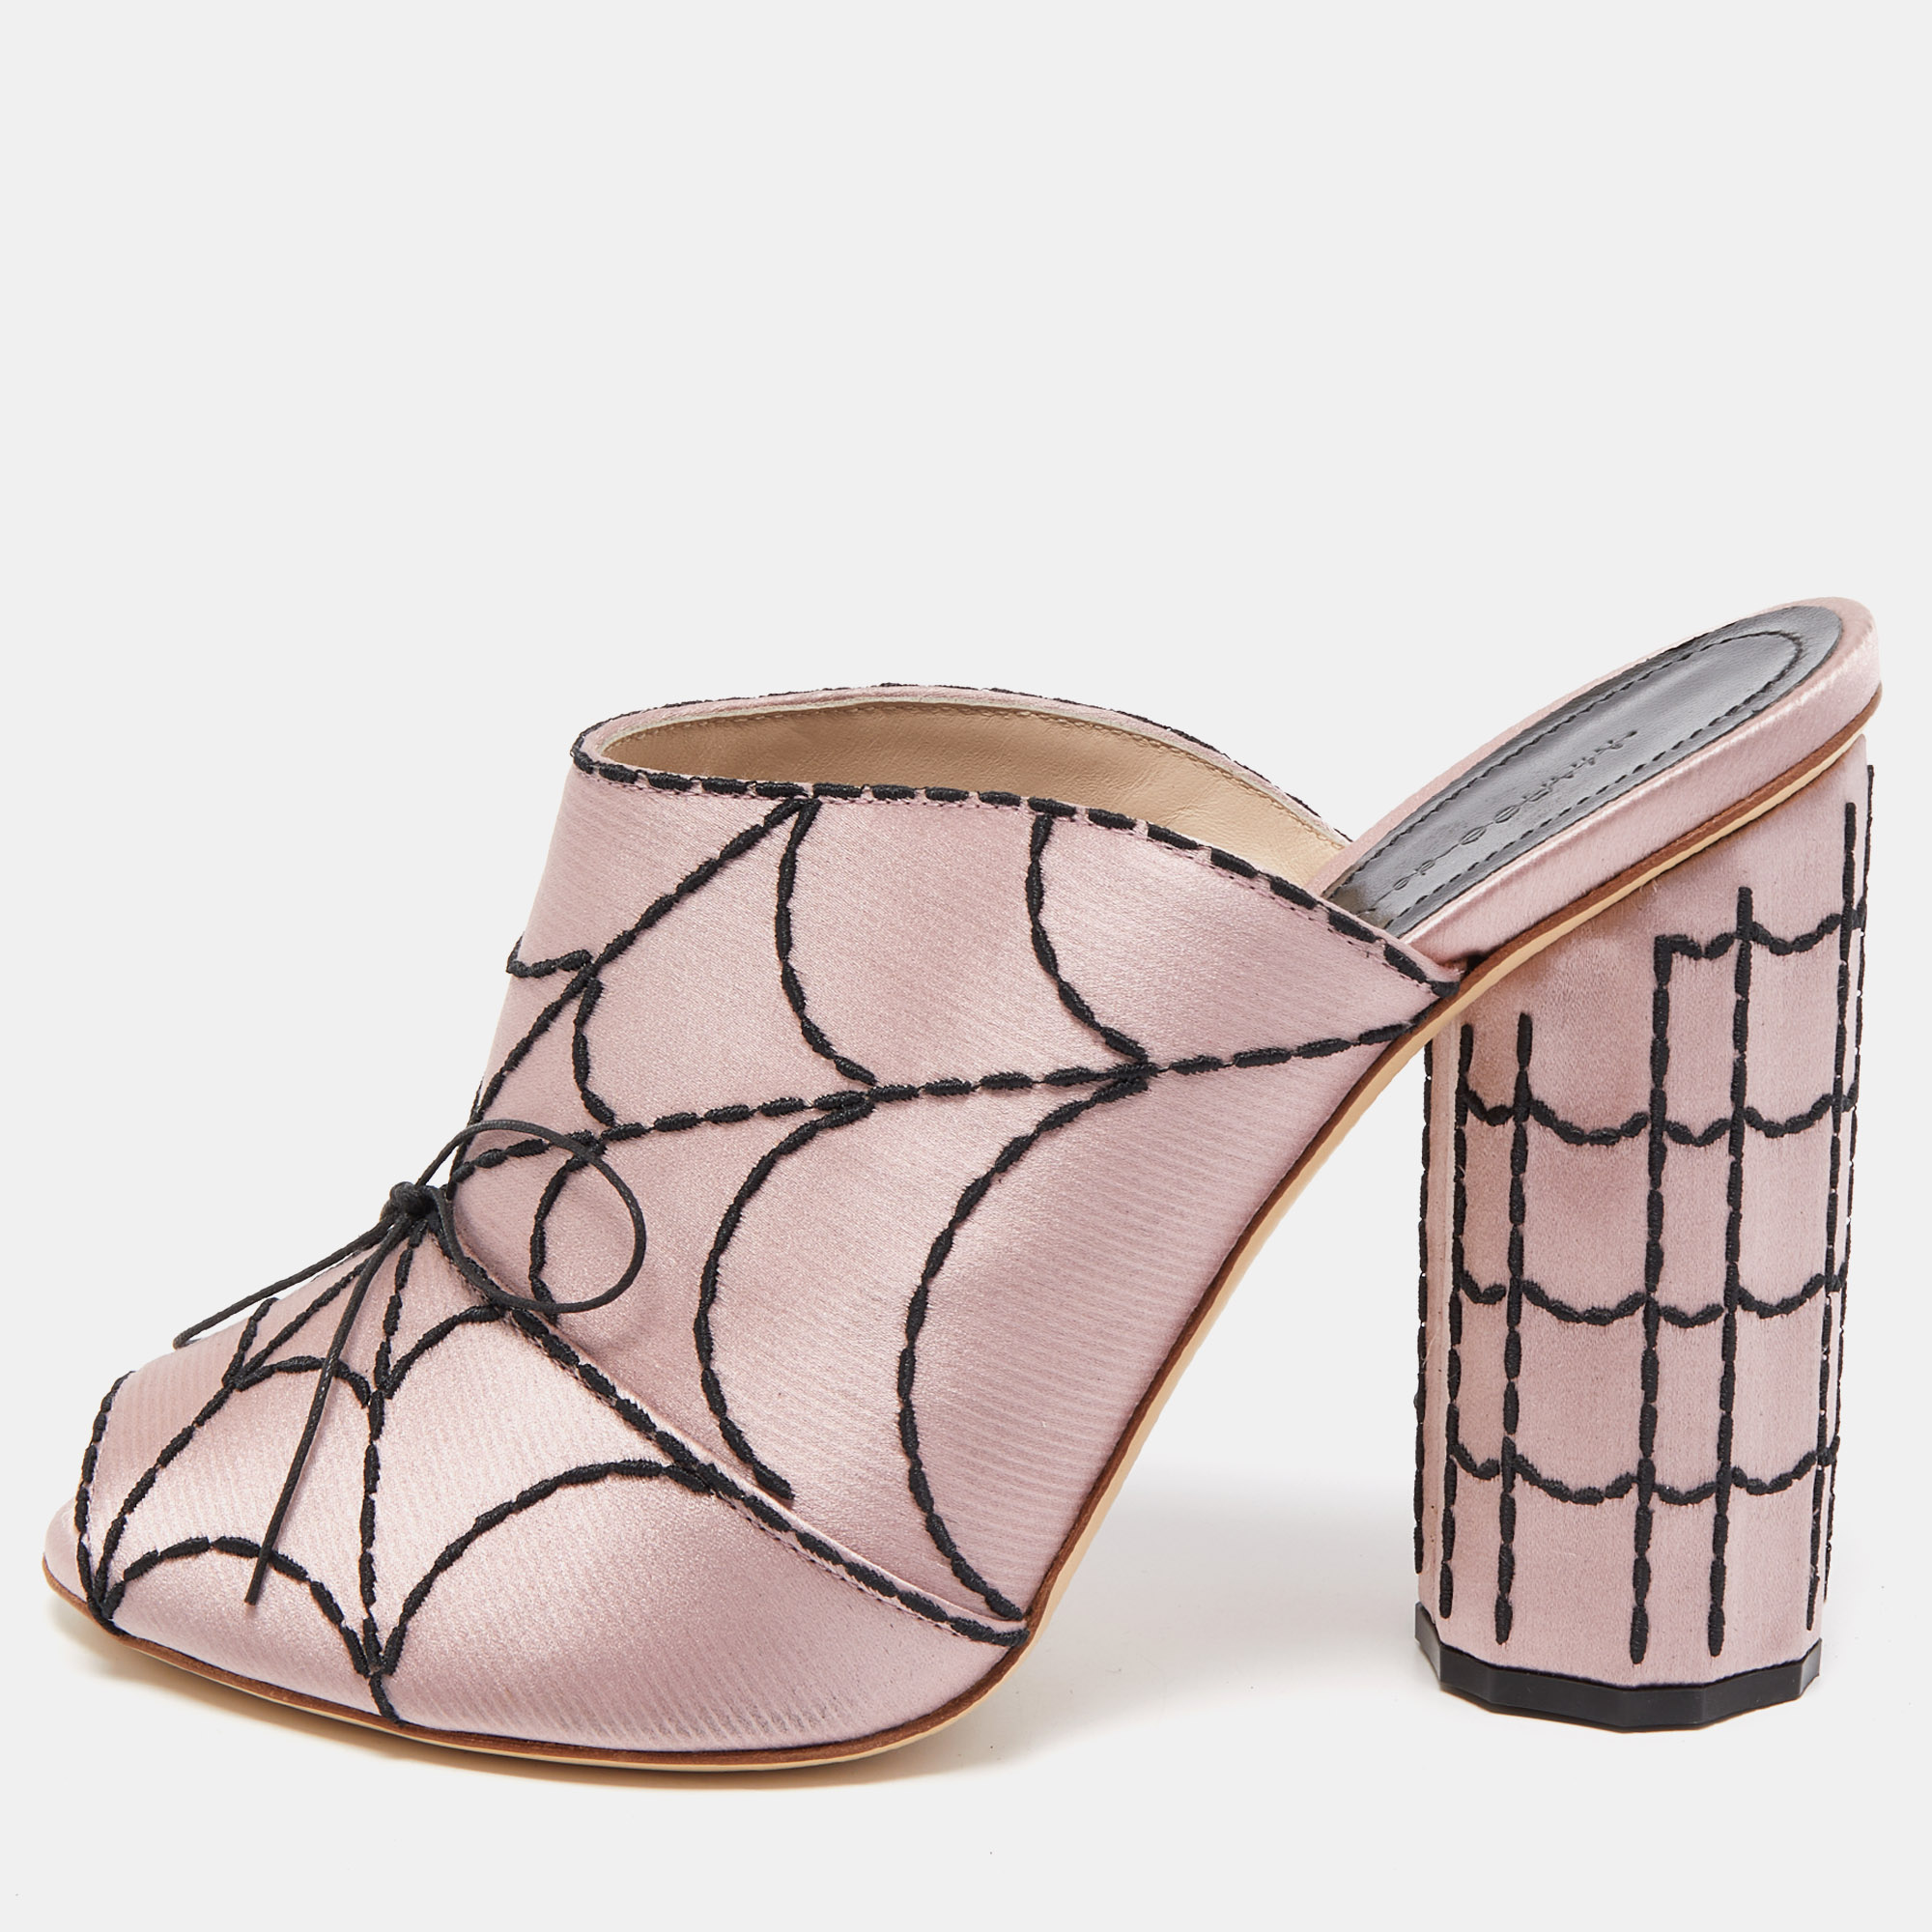 marco de vincenzo pink satin spider web embroidered open toe mules size 39.5